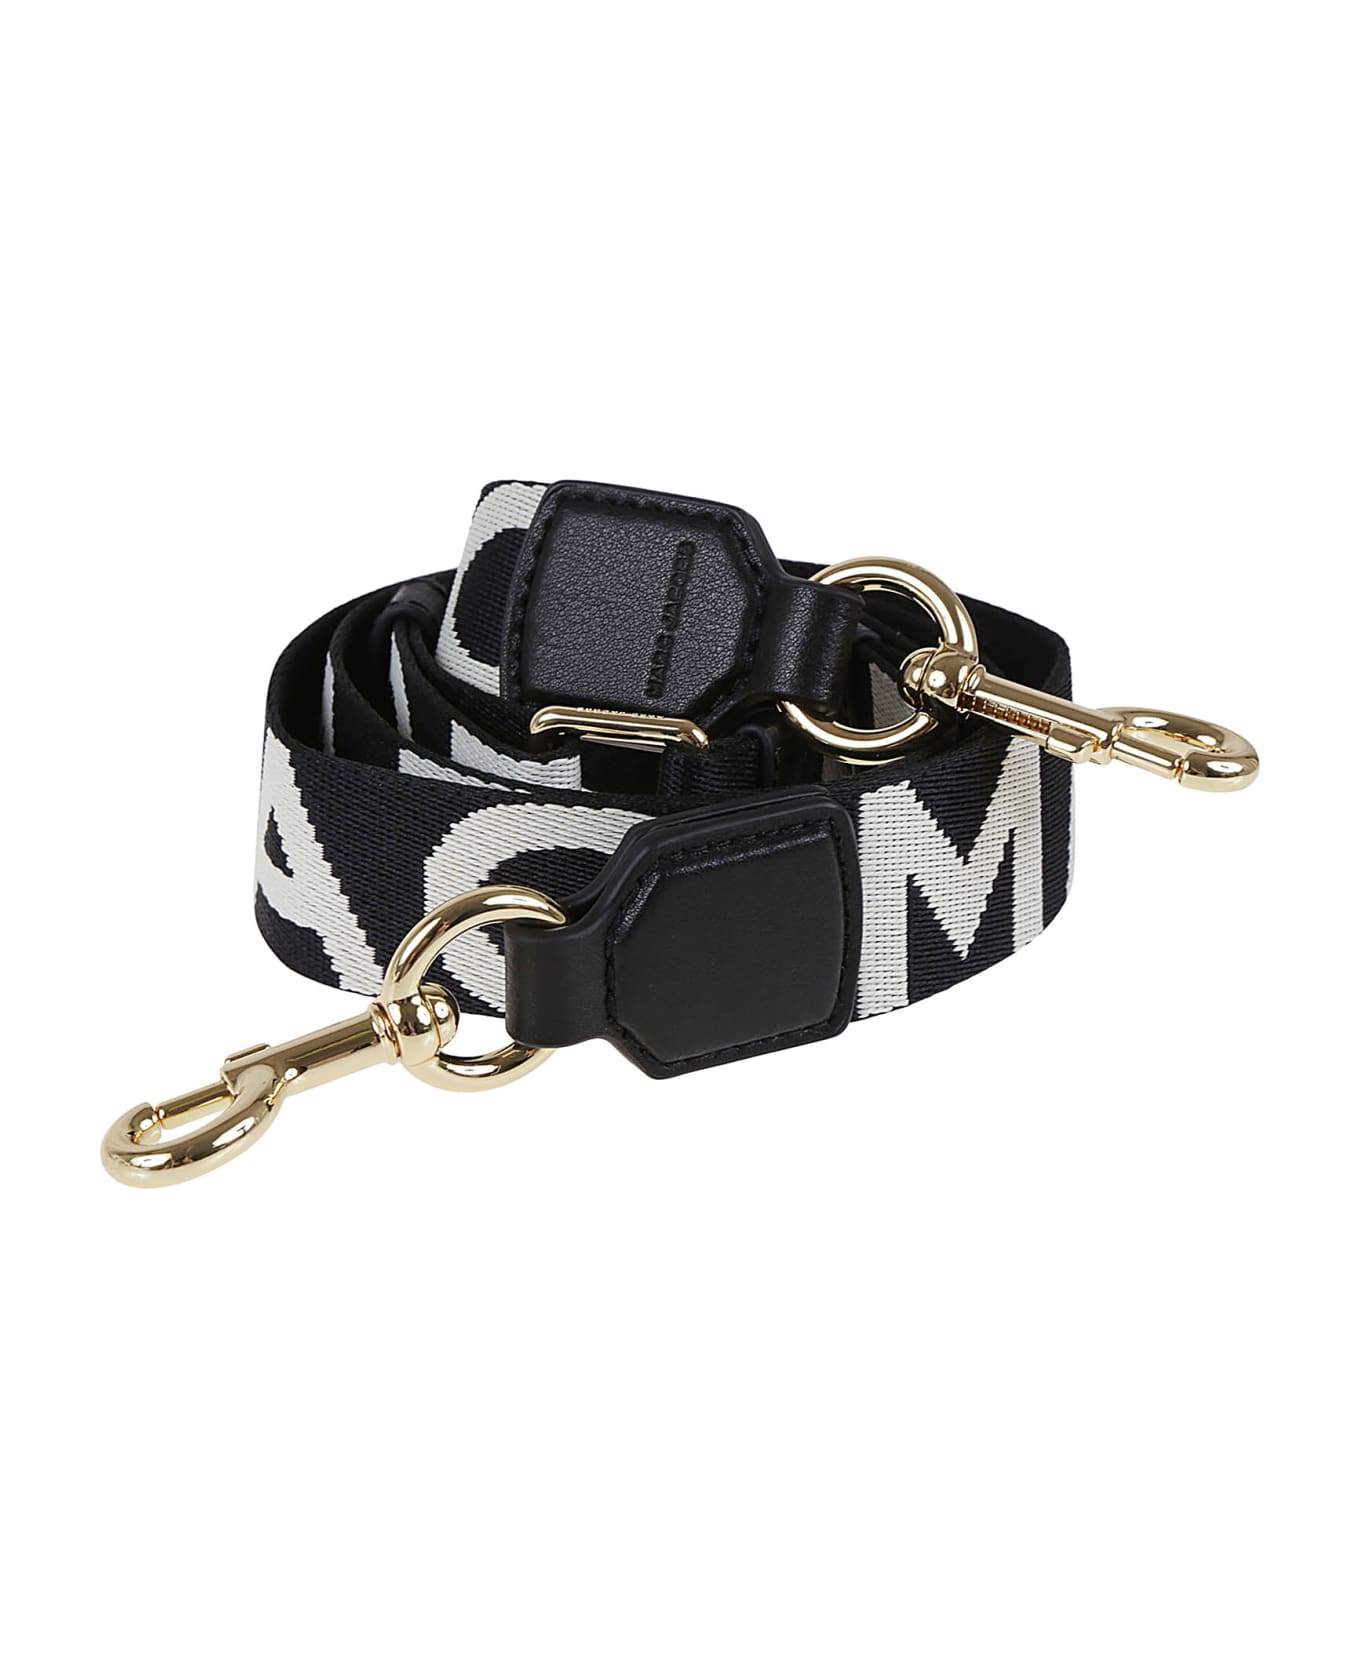 Marc Jacobs 'the Thin Strap' Shoulder Strap - Black White バッグ